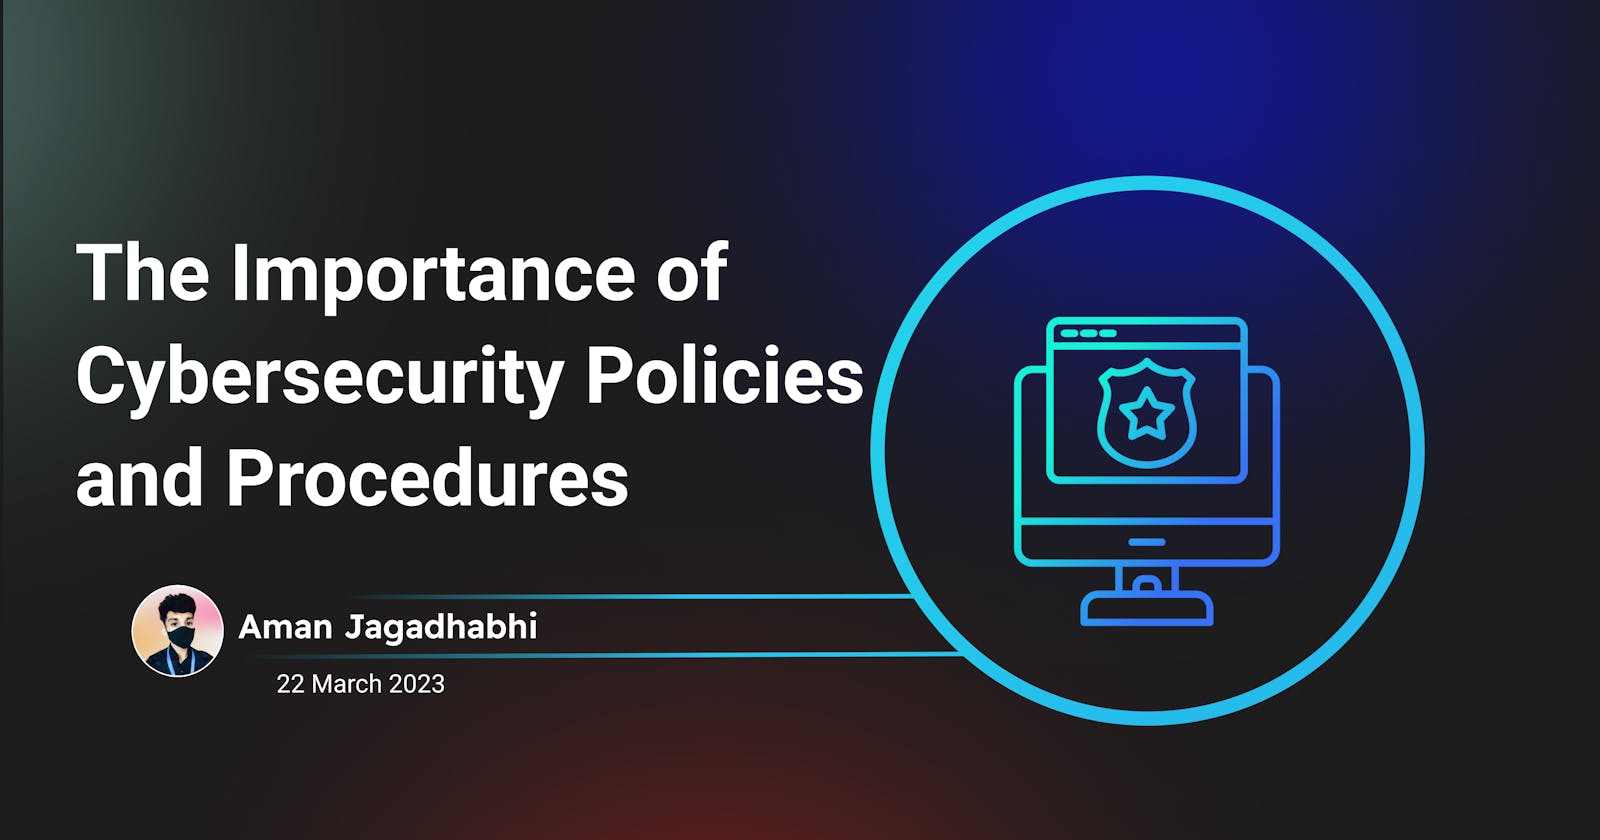 The Importance of Cybersecurity Policies and Procedures